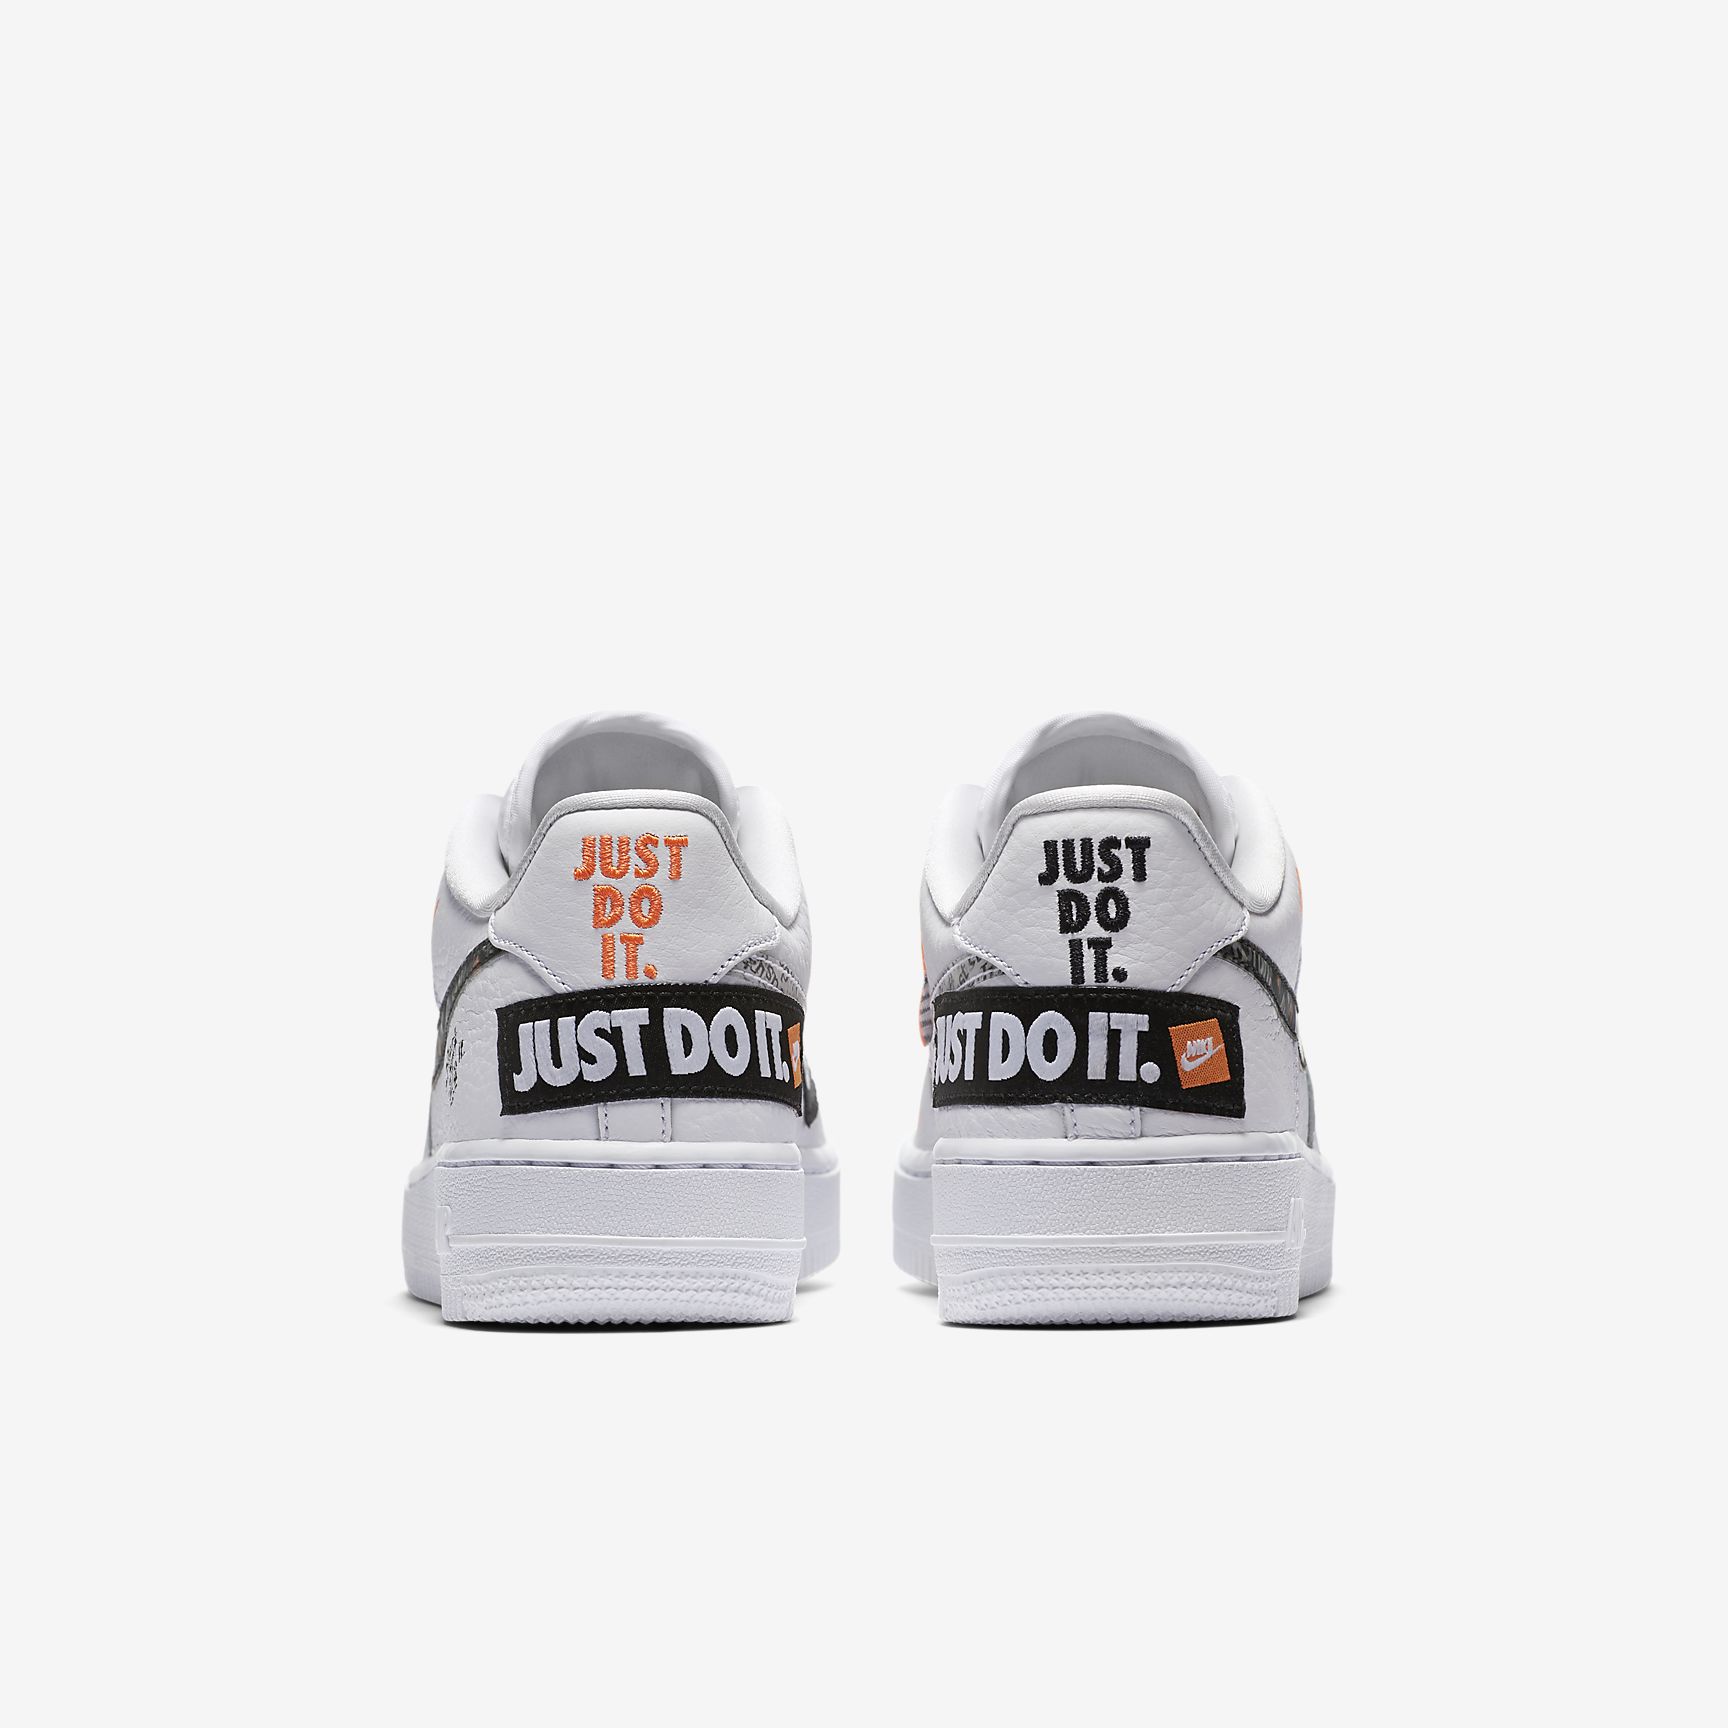 Nike Air Force 1- Just do it - Dattobs Webstore